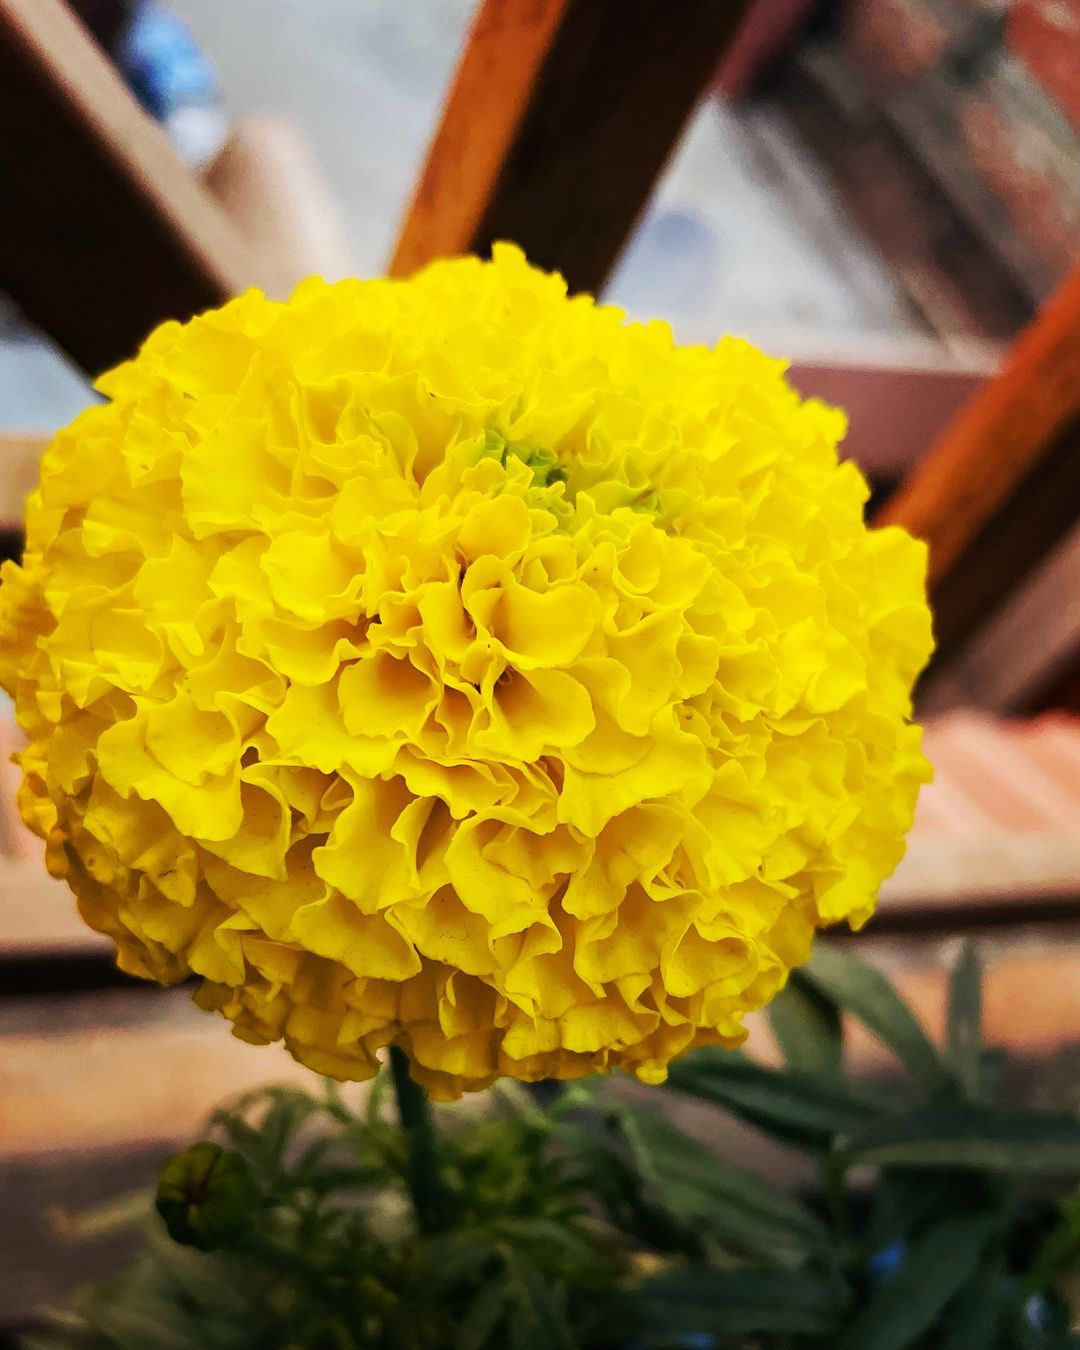 Yellow marigold flower in pot on table.